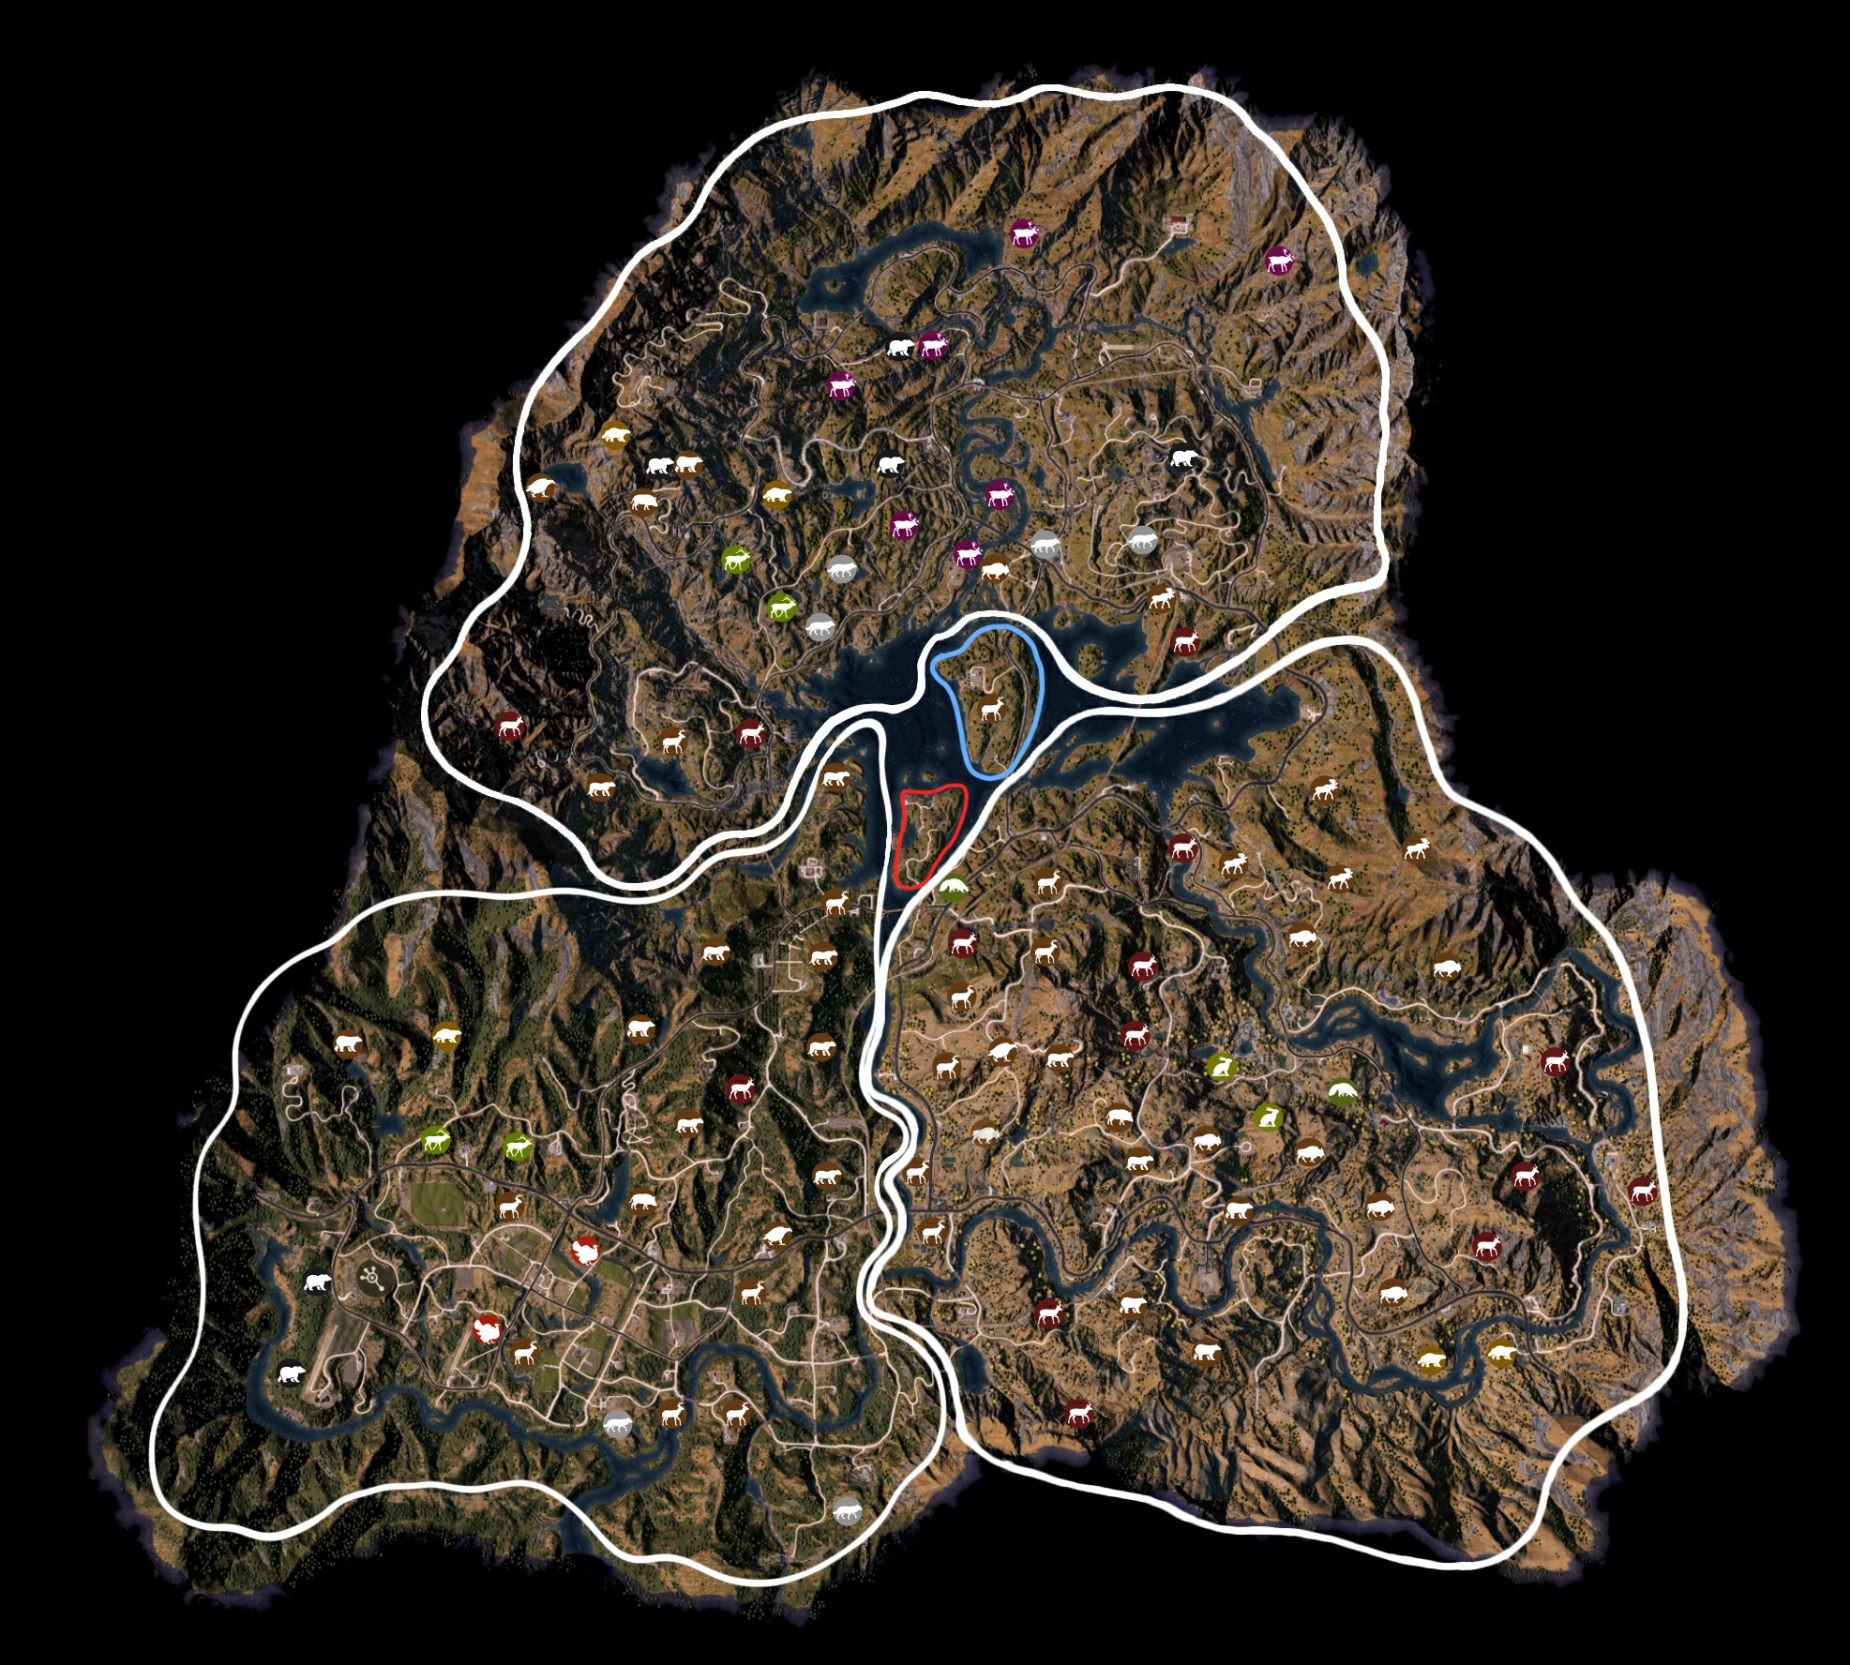 Steam munity Guide Far Cry 5 World Map & Locations